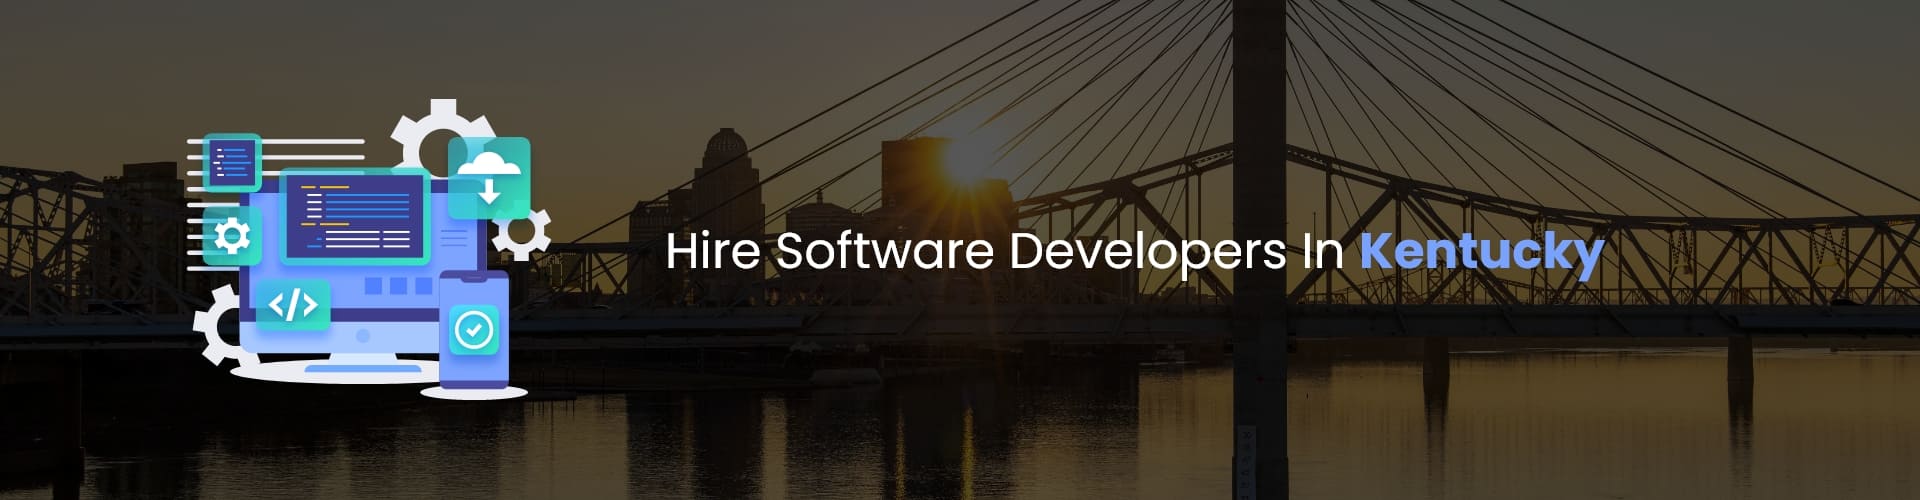 hire software developers in kentucky